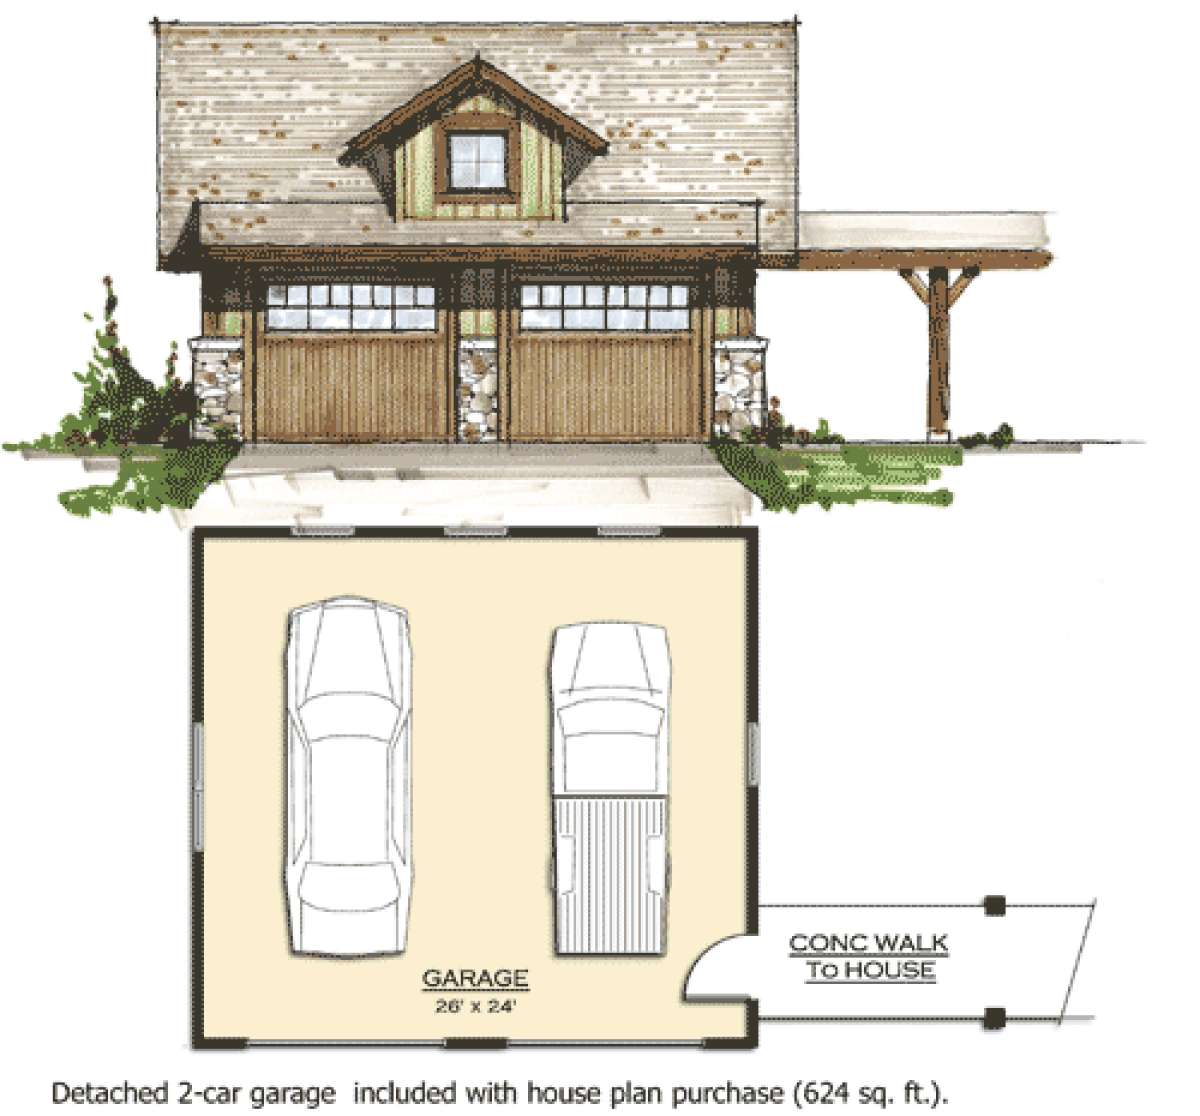 Garage for House Plan #8504-00066